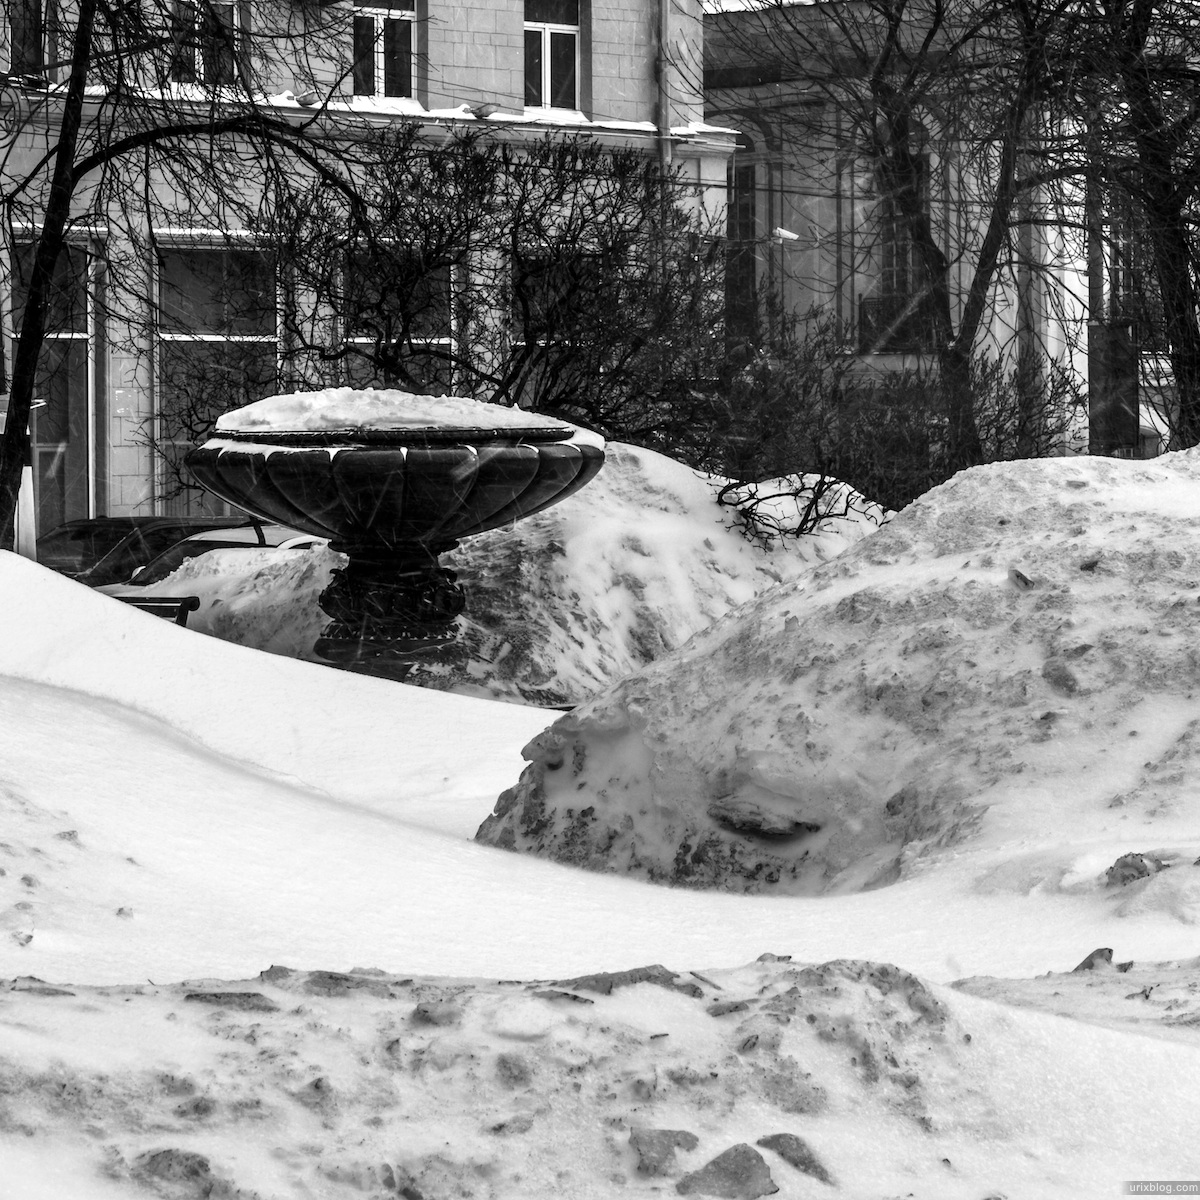 2013, Moscow, Weather, Russia, Tverskoy boulevard, Pushkin square, winter, spring, snow, cold, black and white, B/W